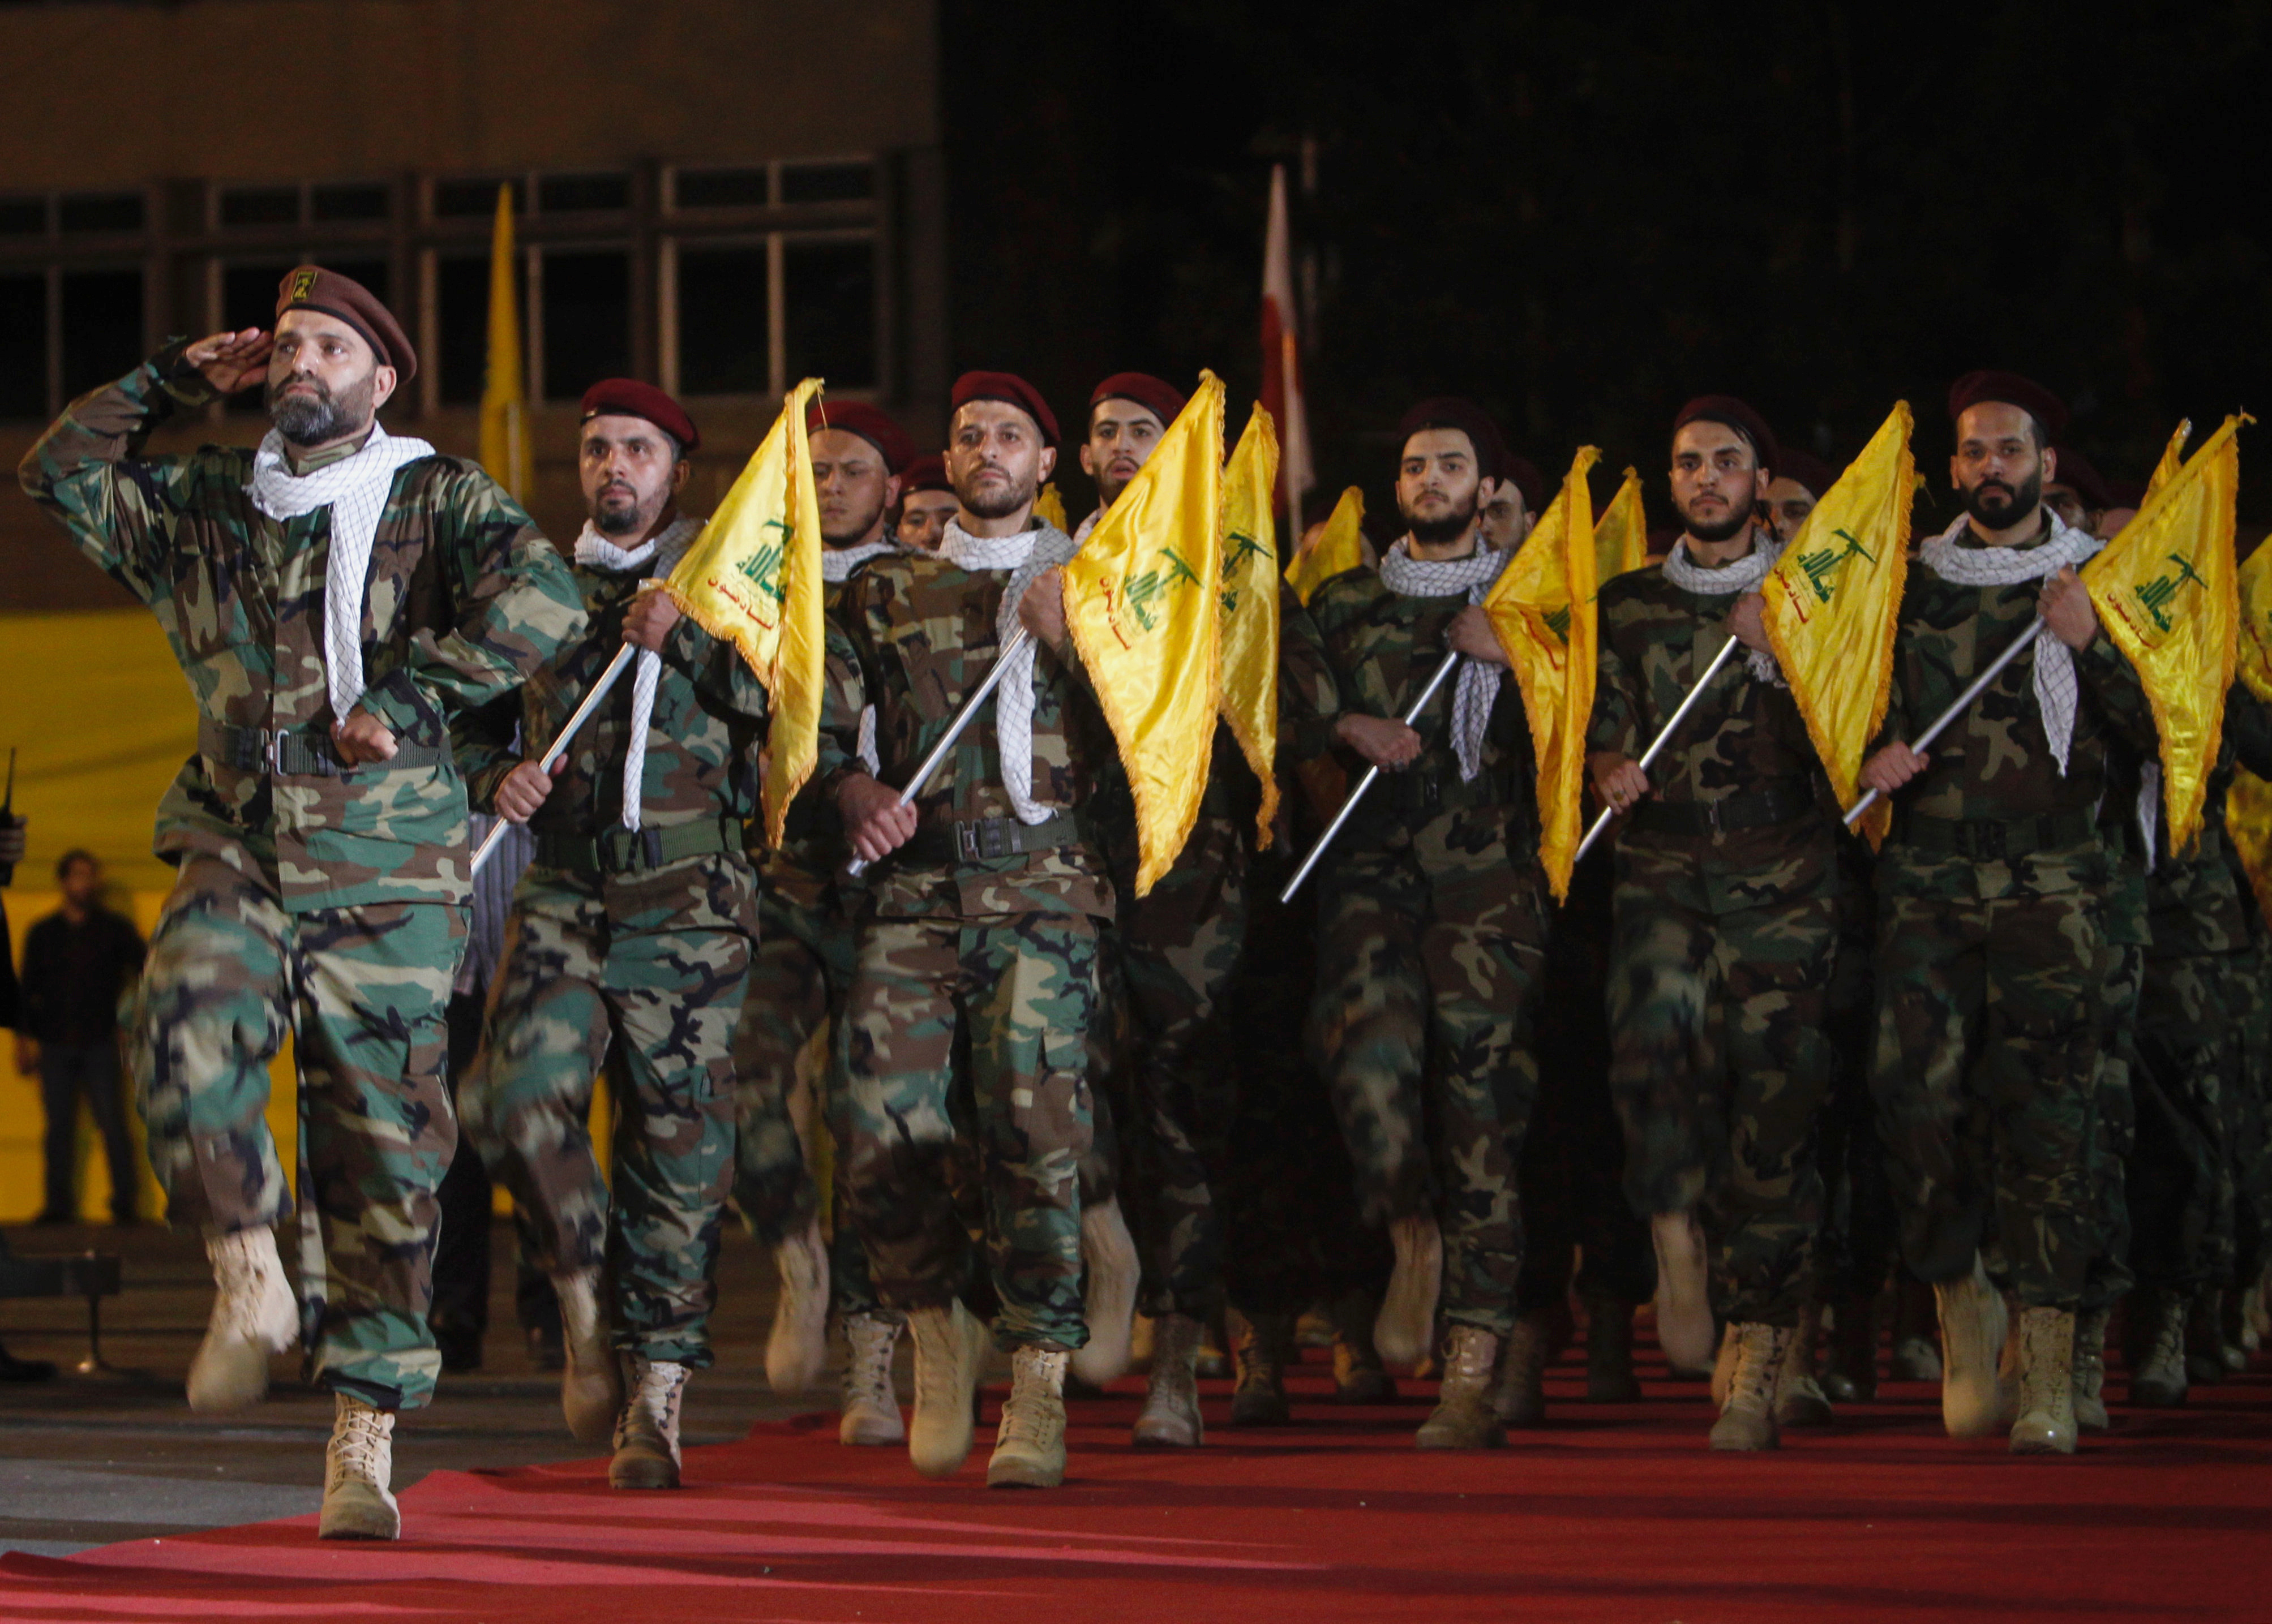 Members of Hezbollah march with party's flags during a rally marking al-Quds Day, (Jerusalem Day) in Beirut